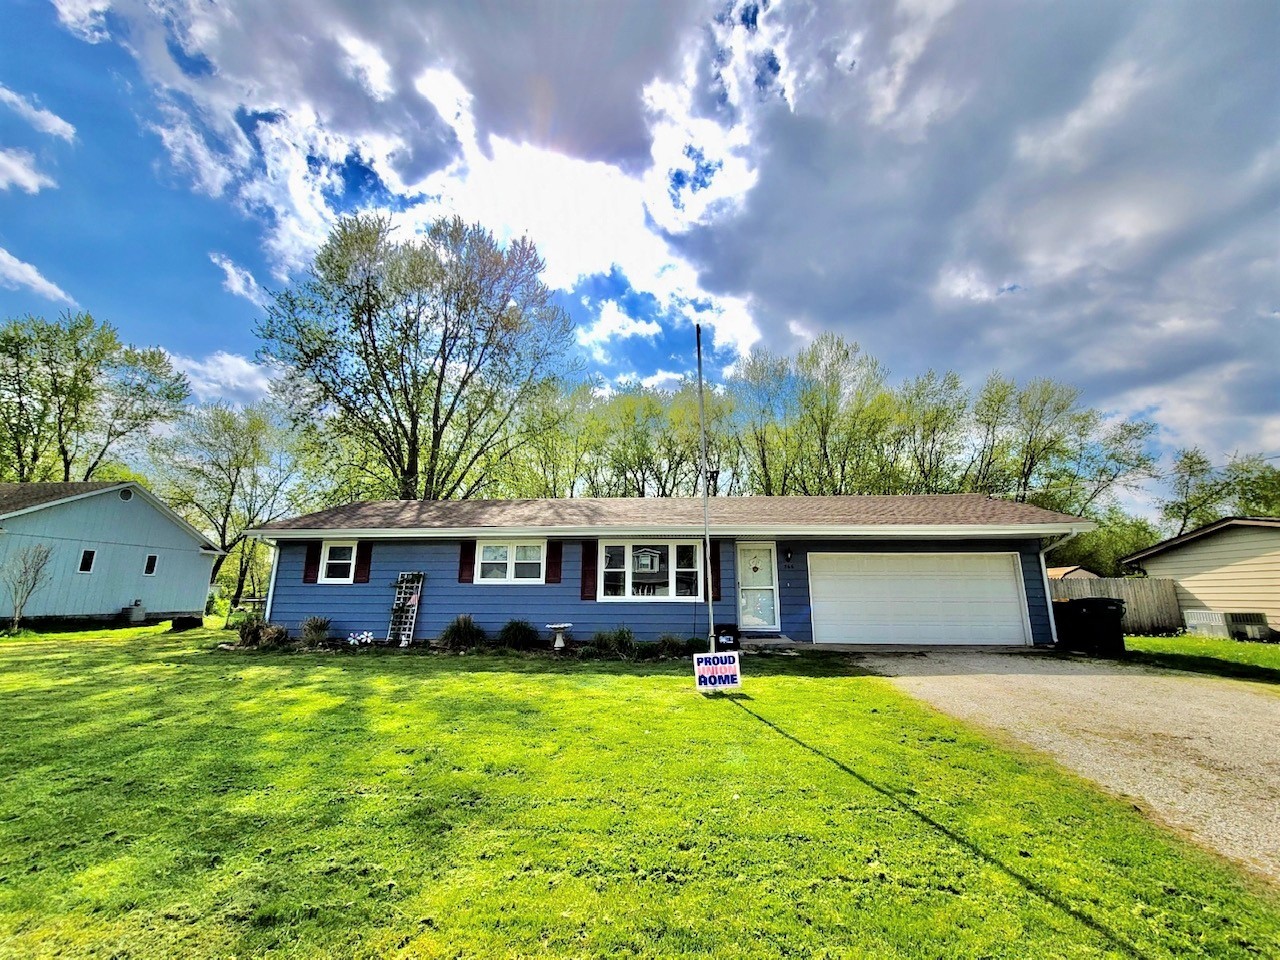 recently sold homes in steward il